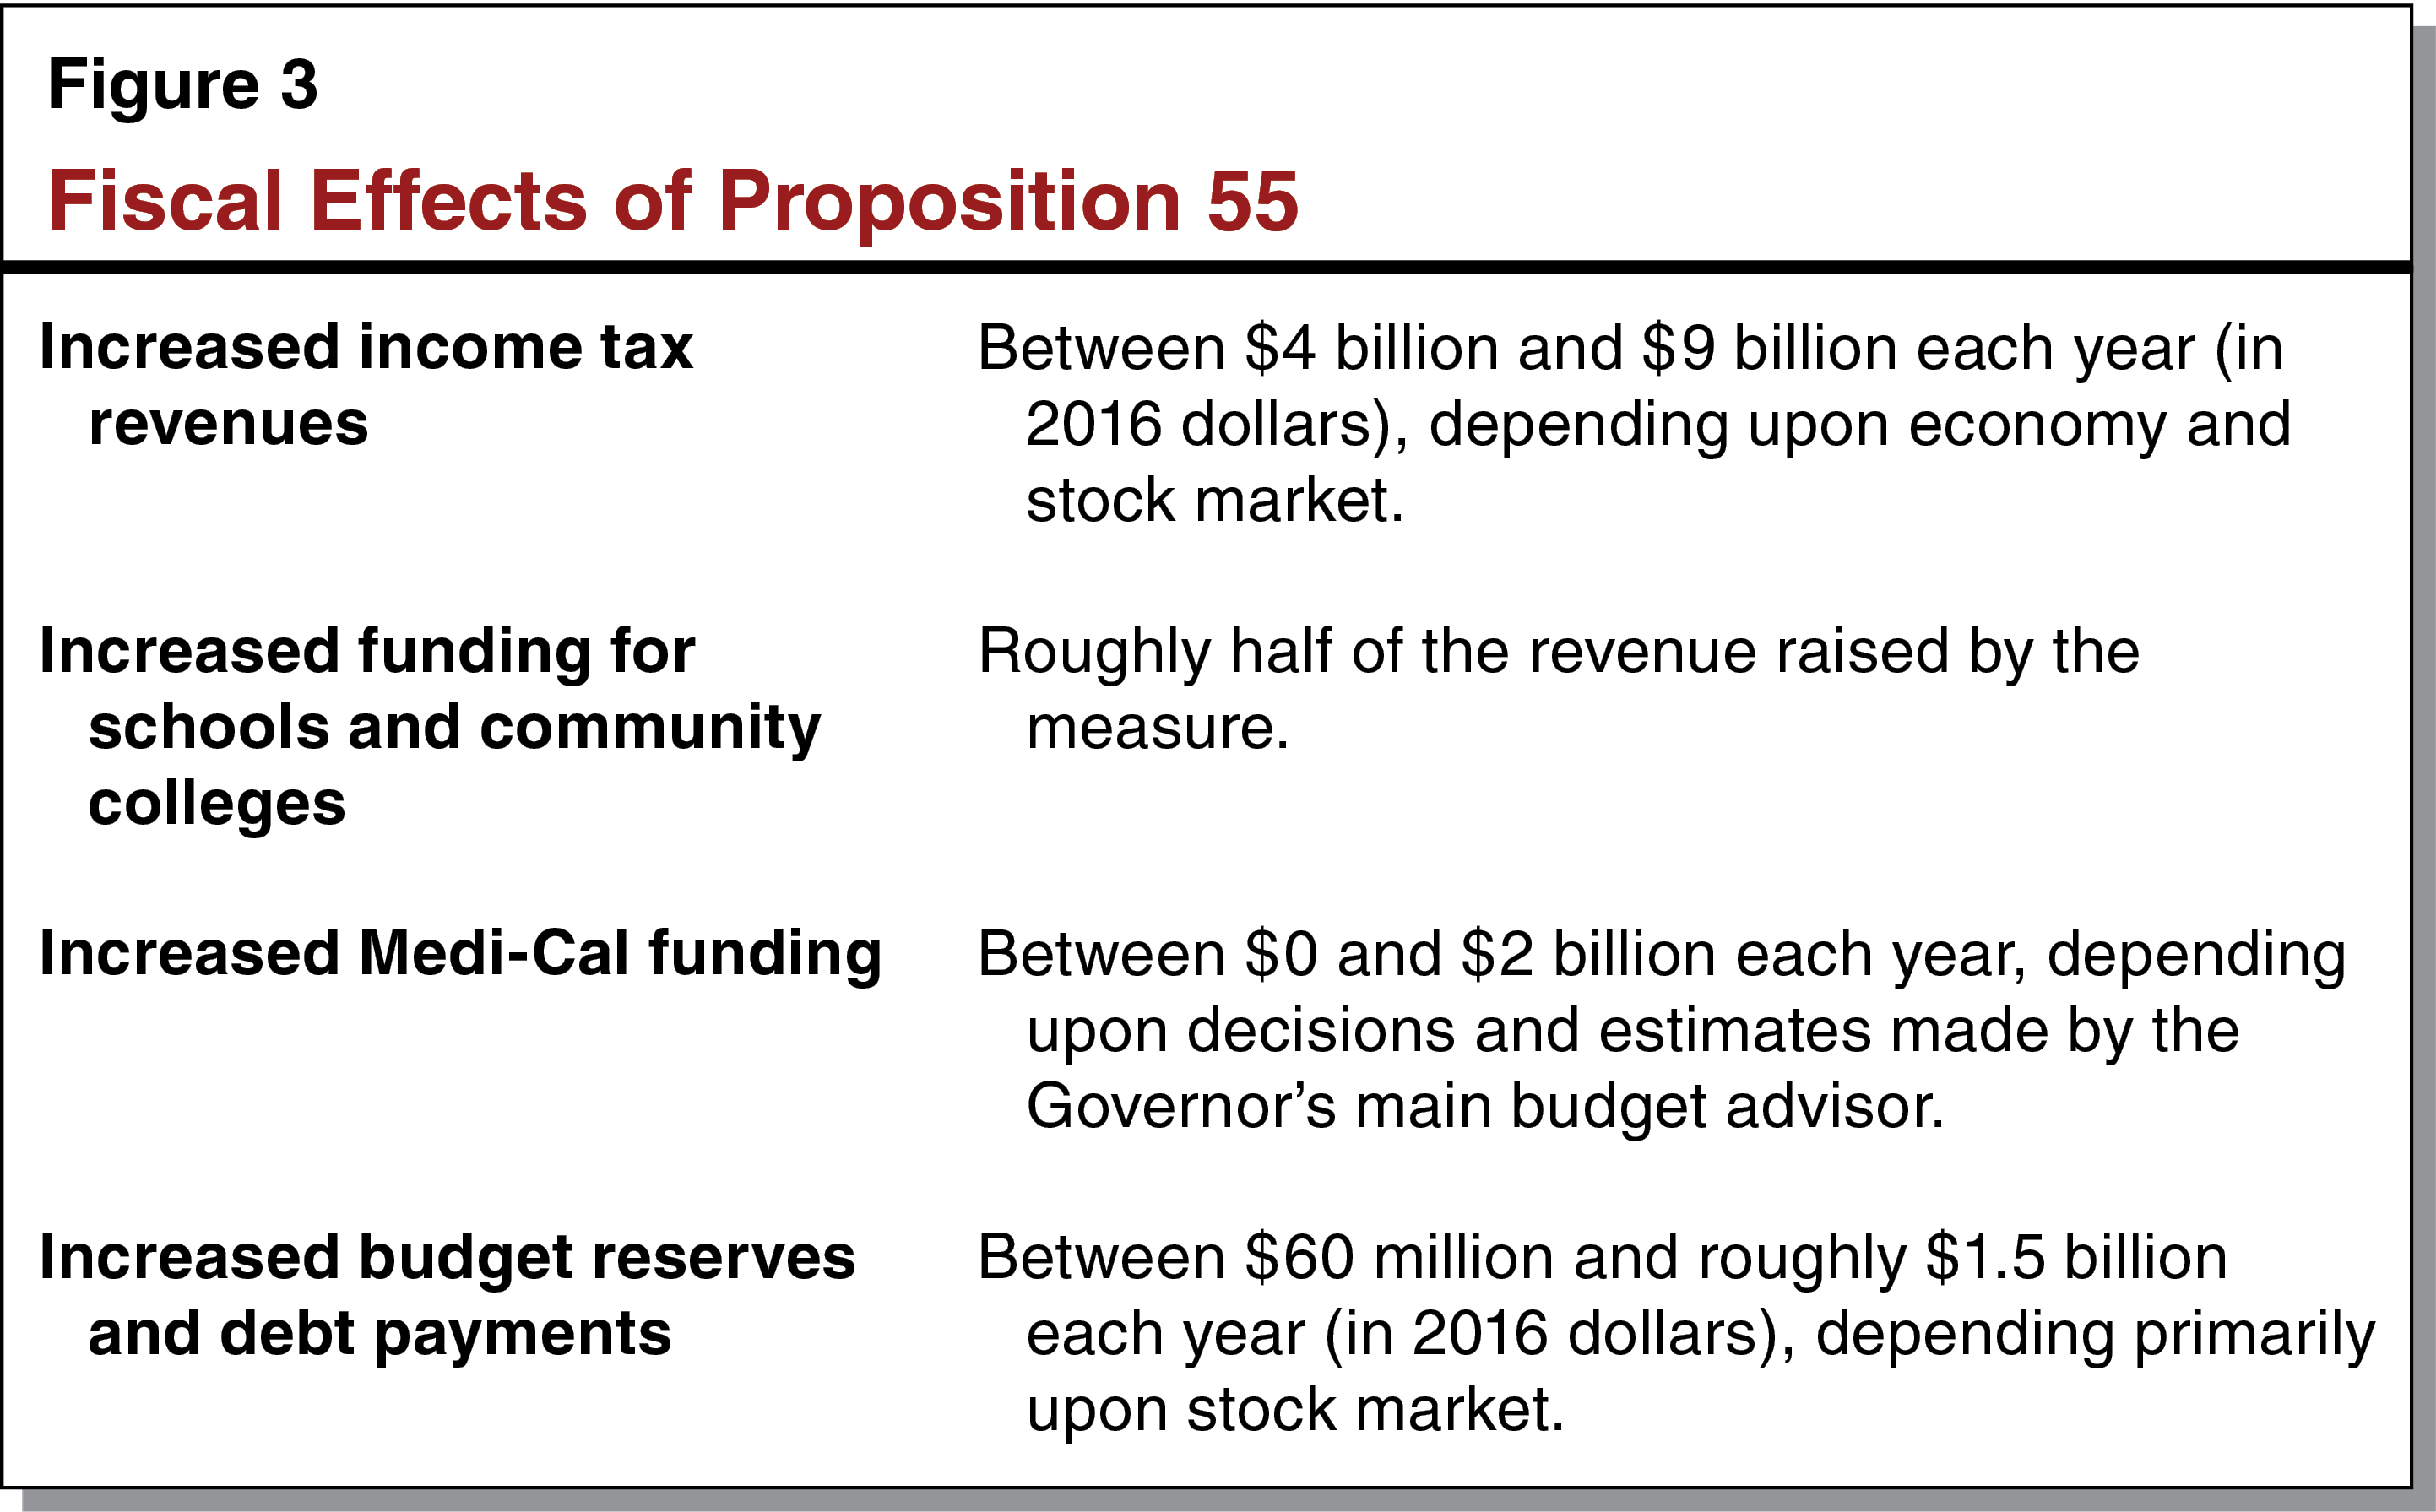 Figure 3 - Fiscal Effects of Proposition 55